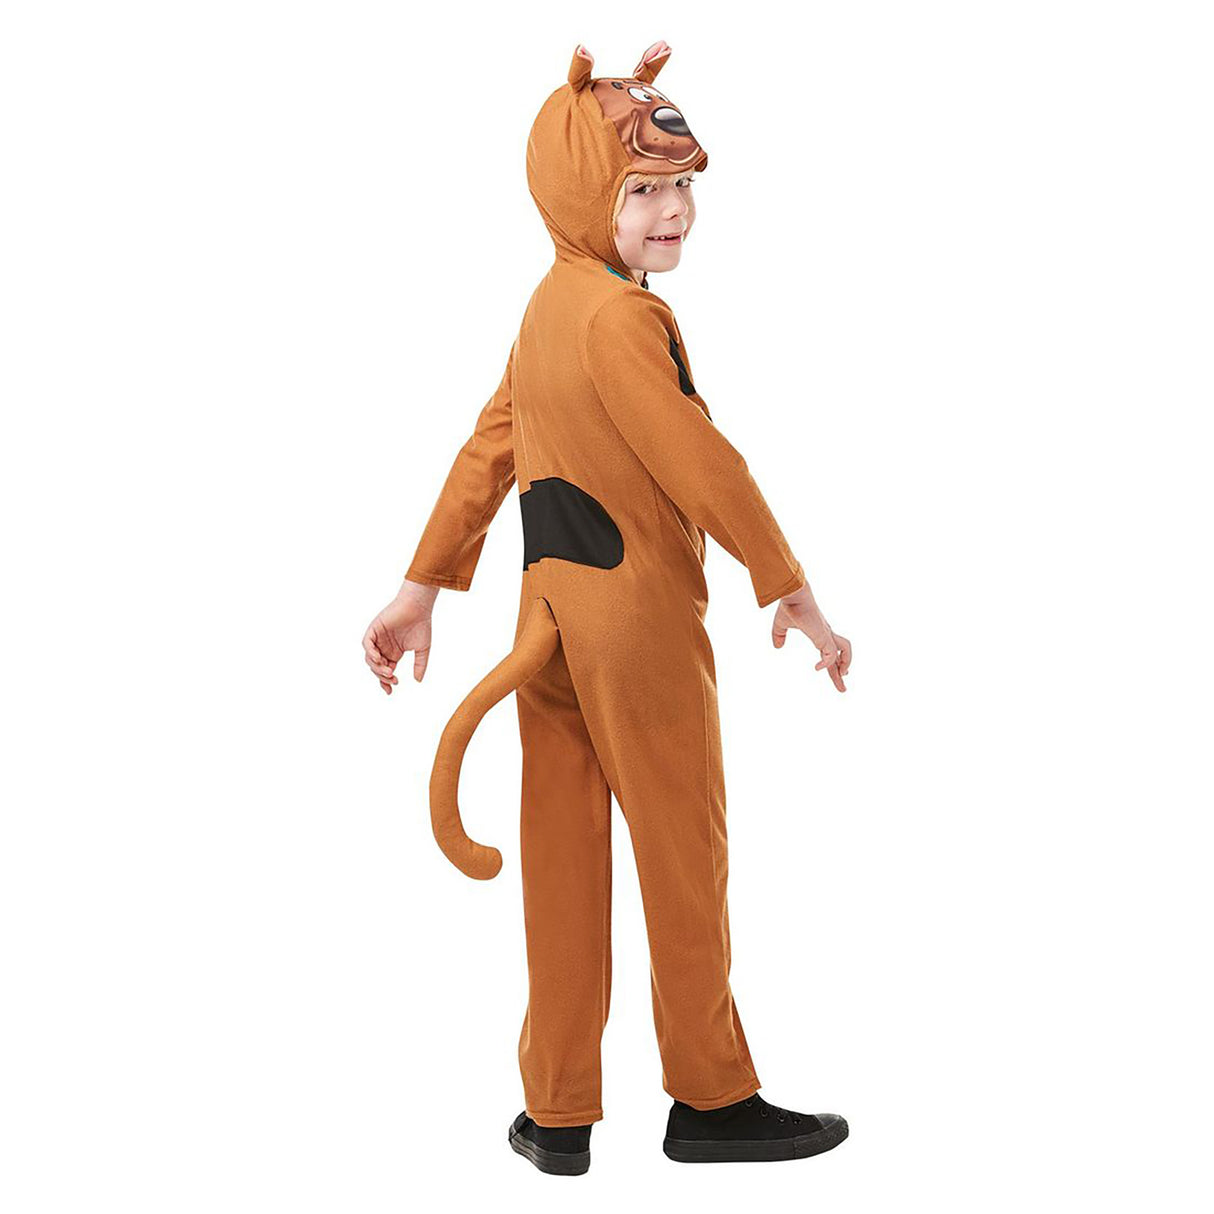 Rubies Scooby Doo Classic Child Costume, Brown (5-6 years)